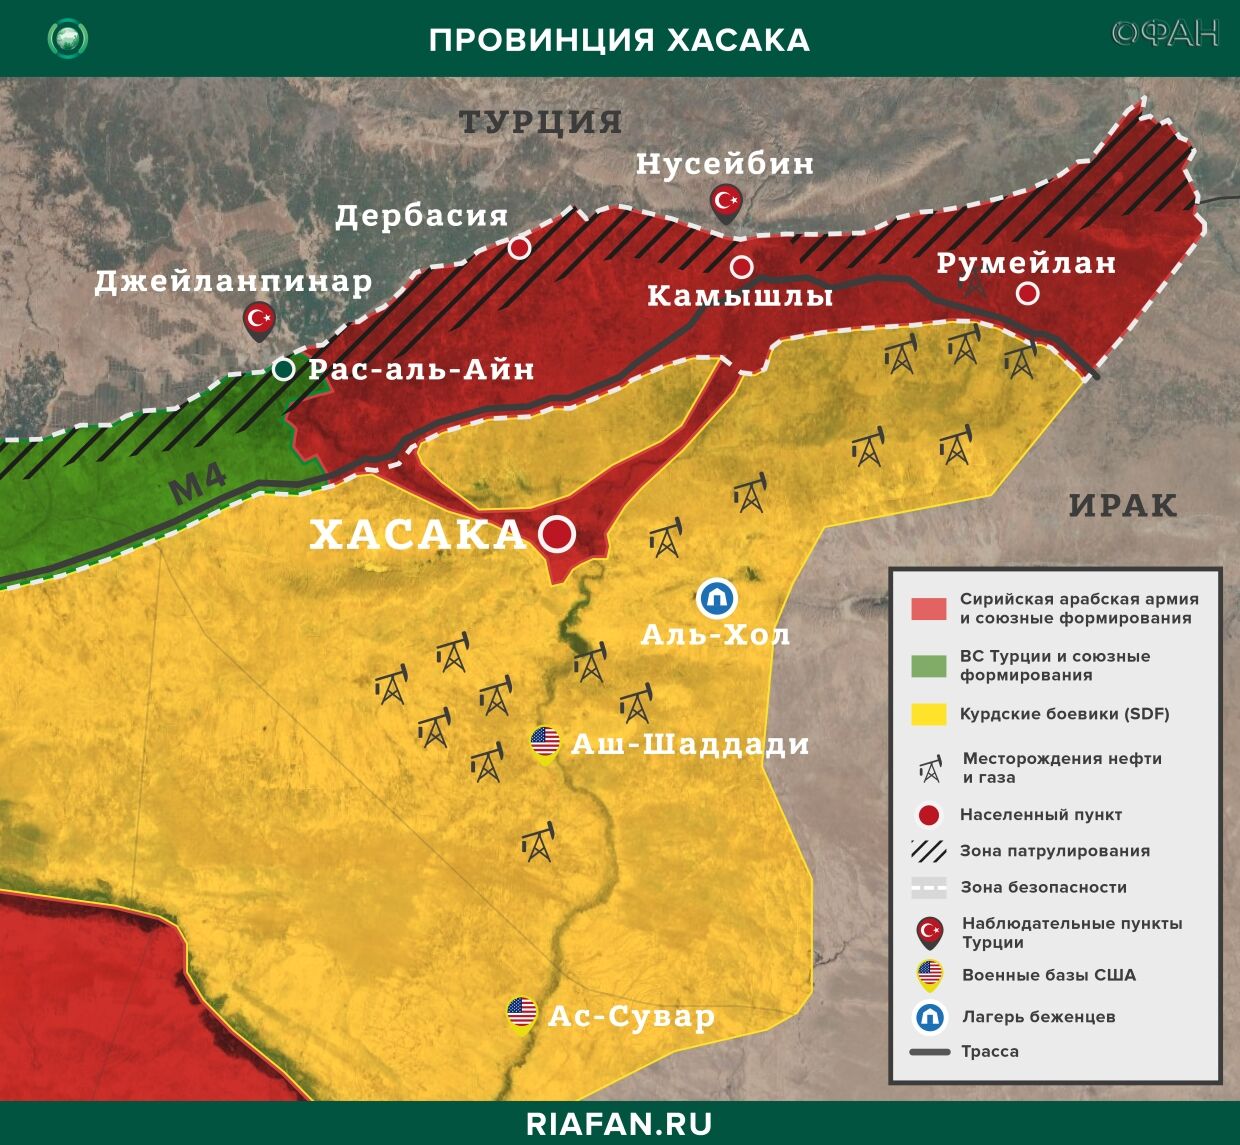 Syria news 31 May 22.30: Turks announced the destruction of two PKK members, farmer injured in a mine explosion in Hama